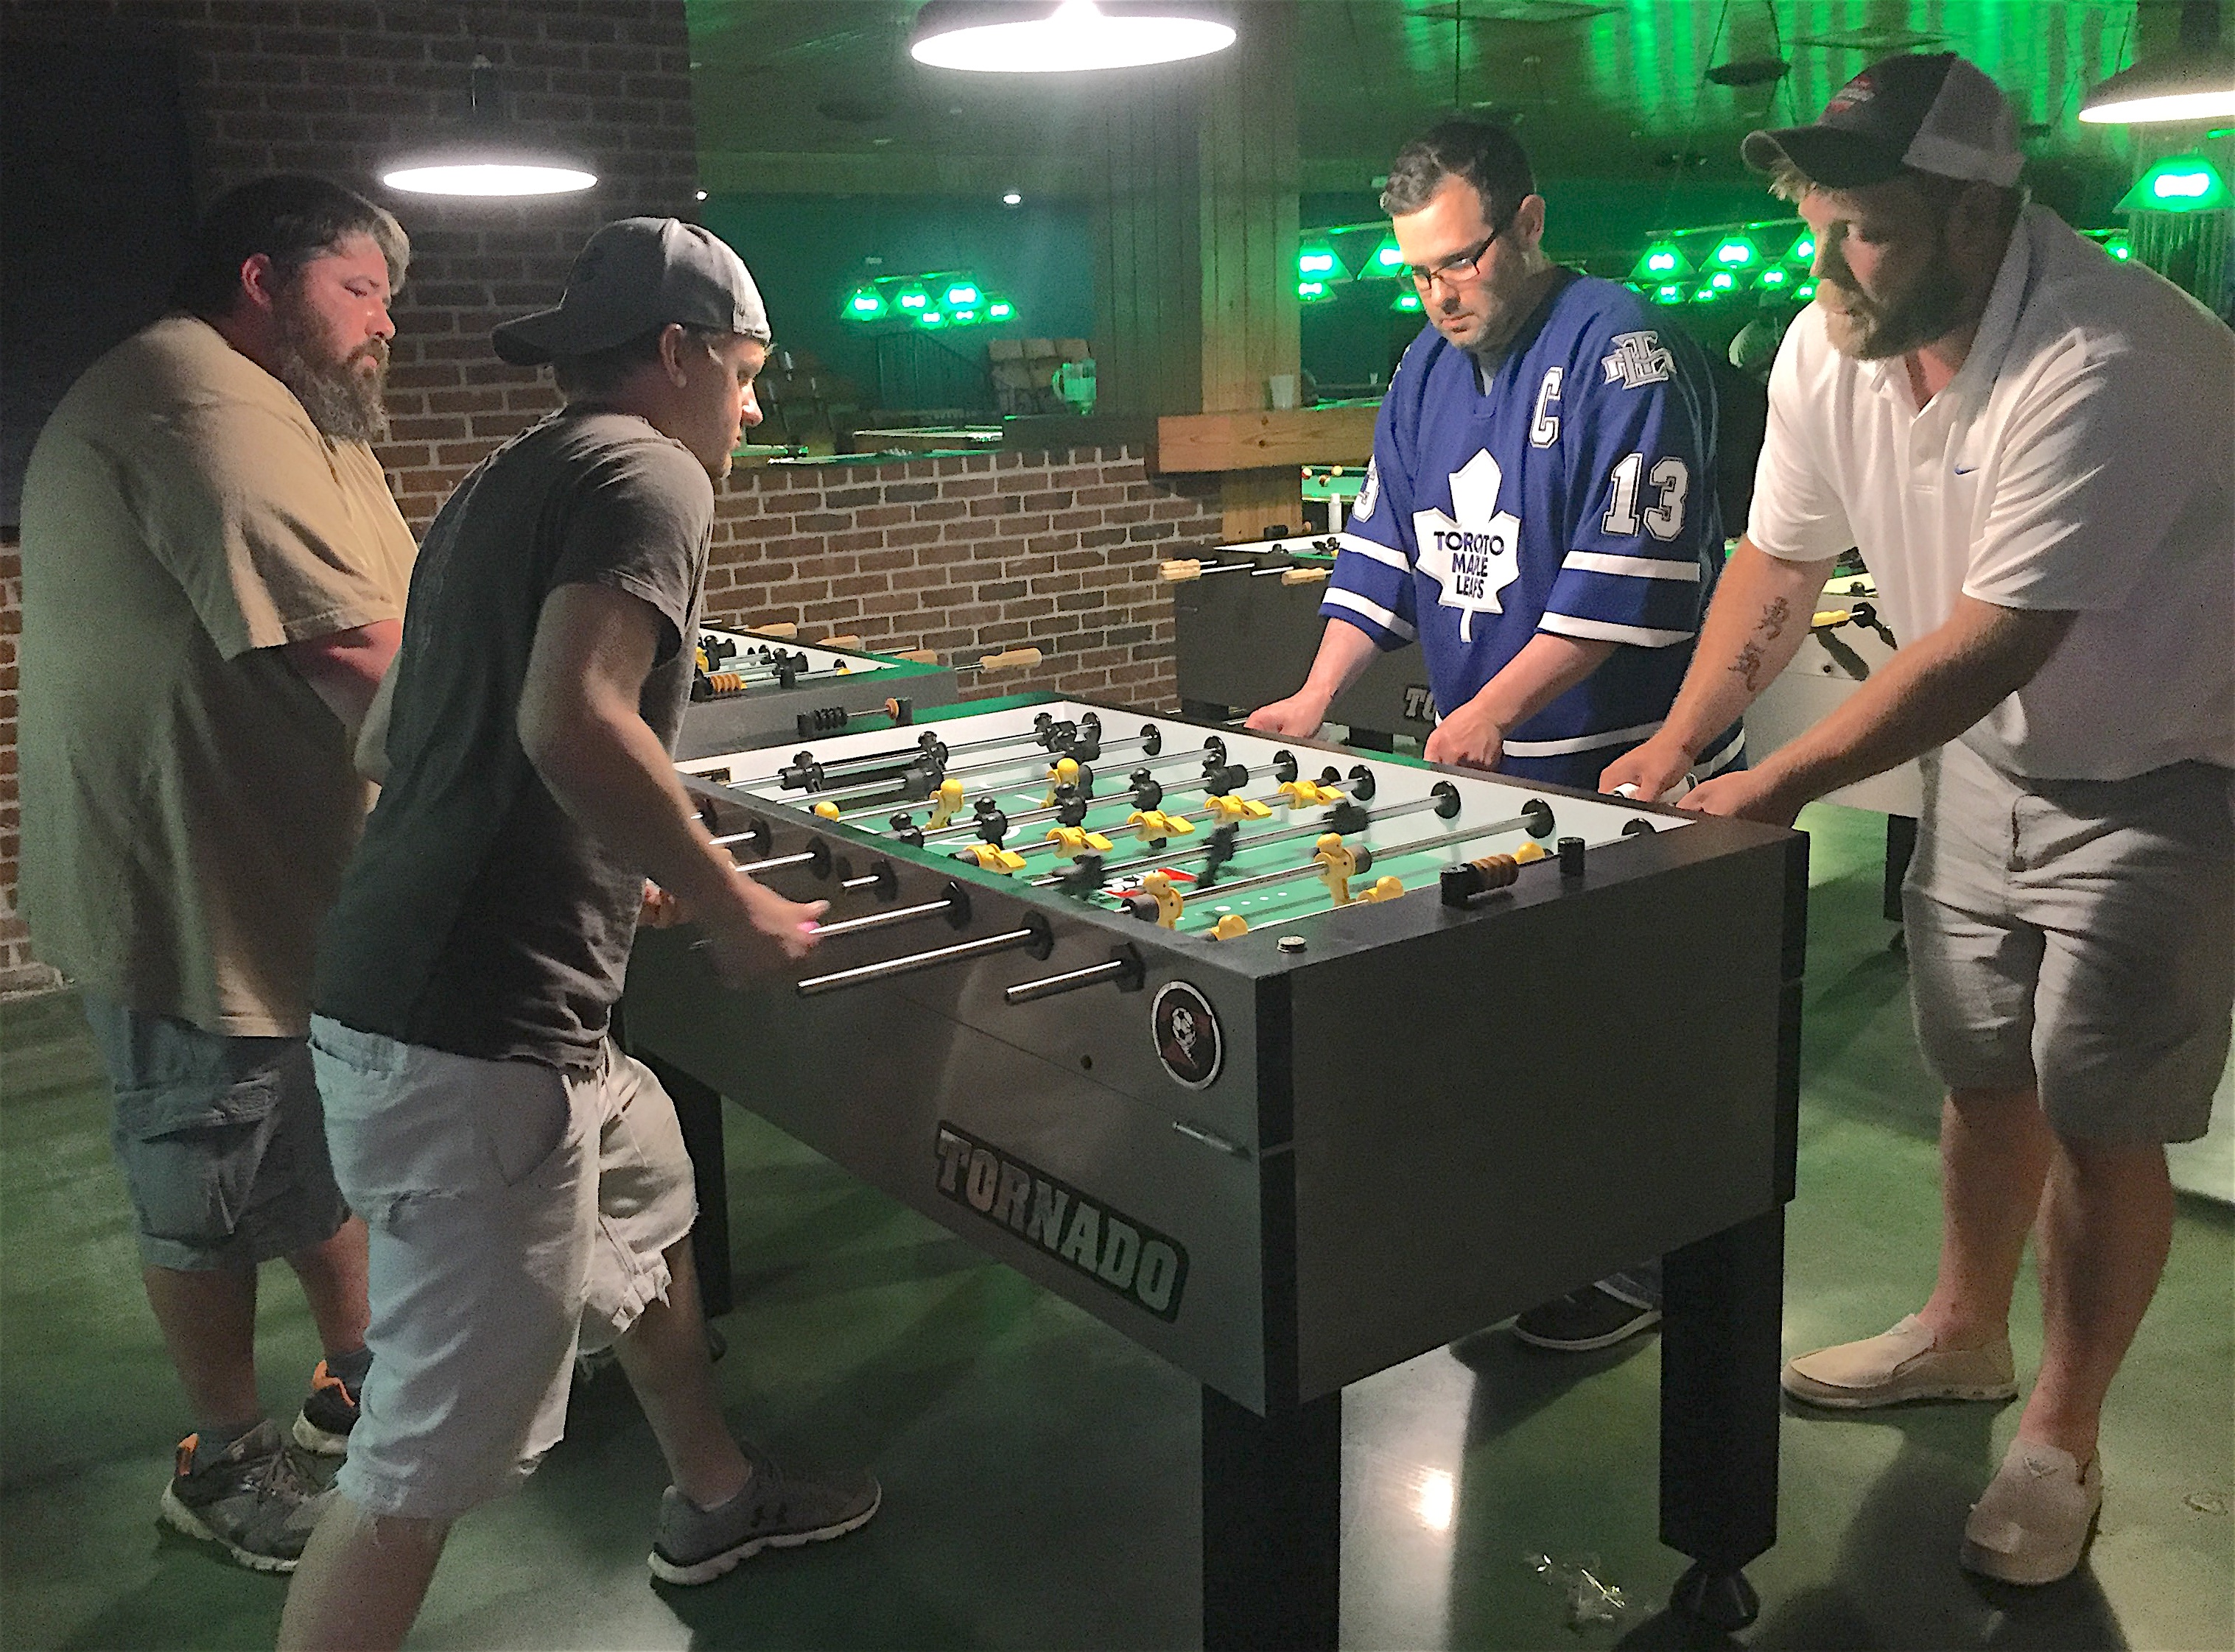 Foosball players Al Widok & Stephen Darby are shown playing against Randy Raposo & Nick Peterson at the Break Restaurant & Billiards located in the Five-points South area of Birmingham, Alabama. The business closes and the building is demolished later in the year 2018.